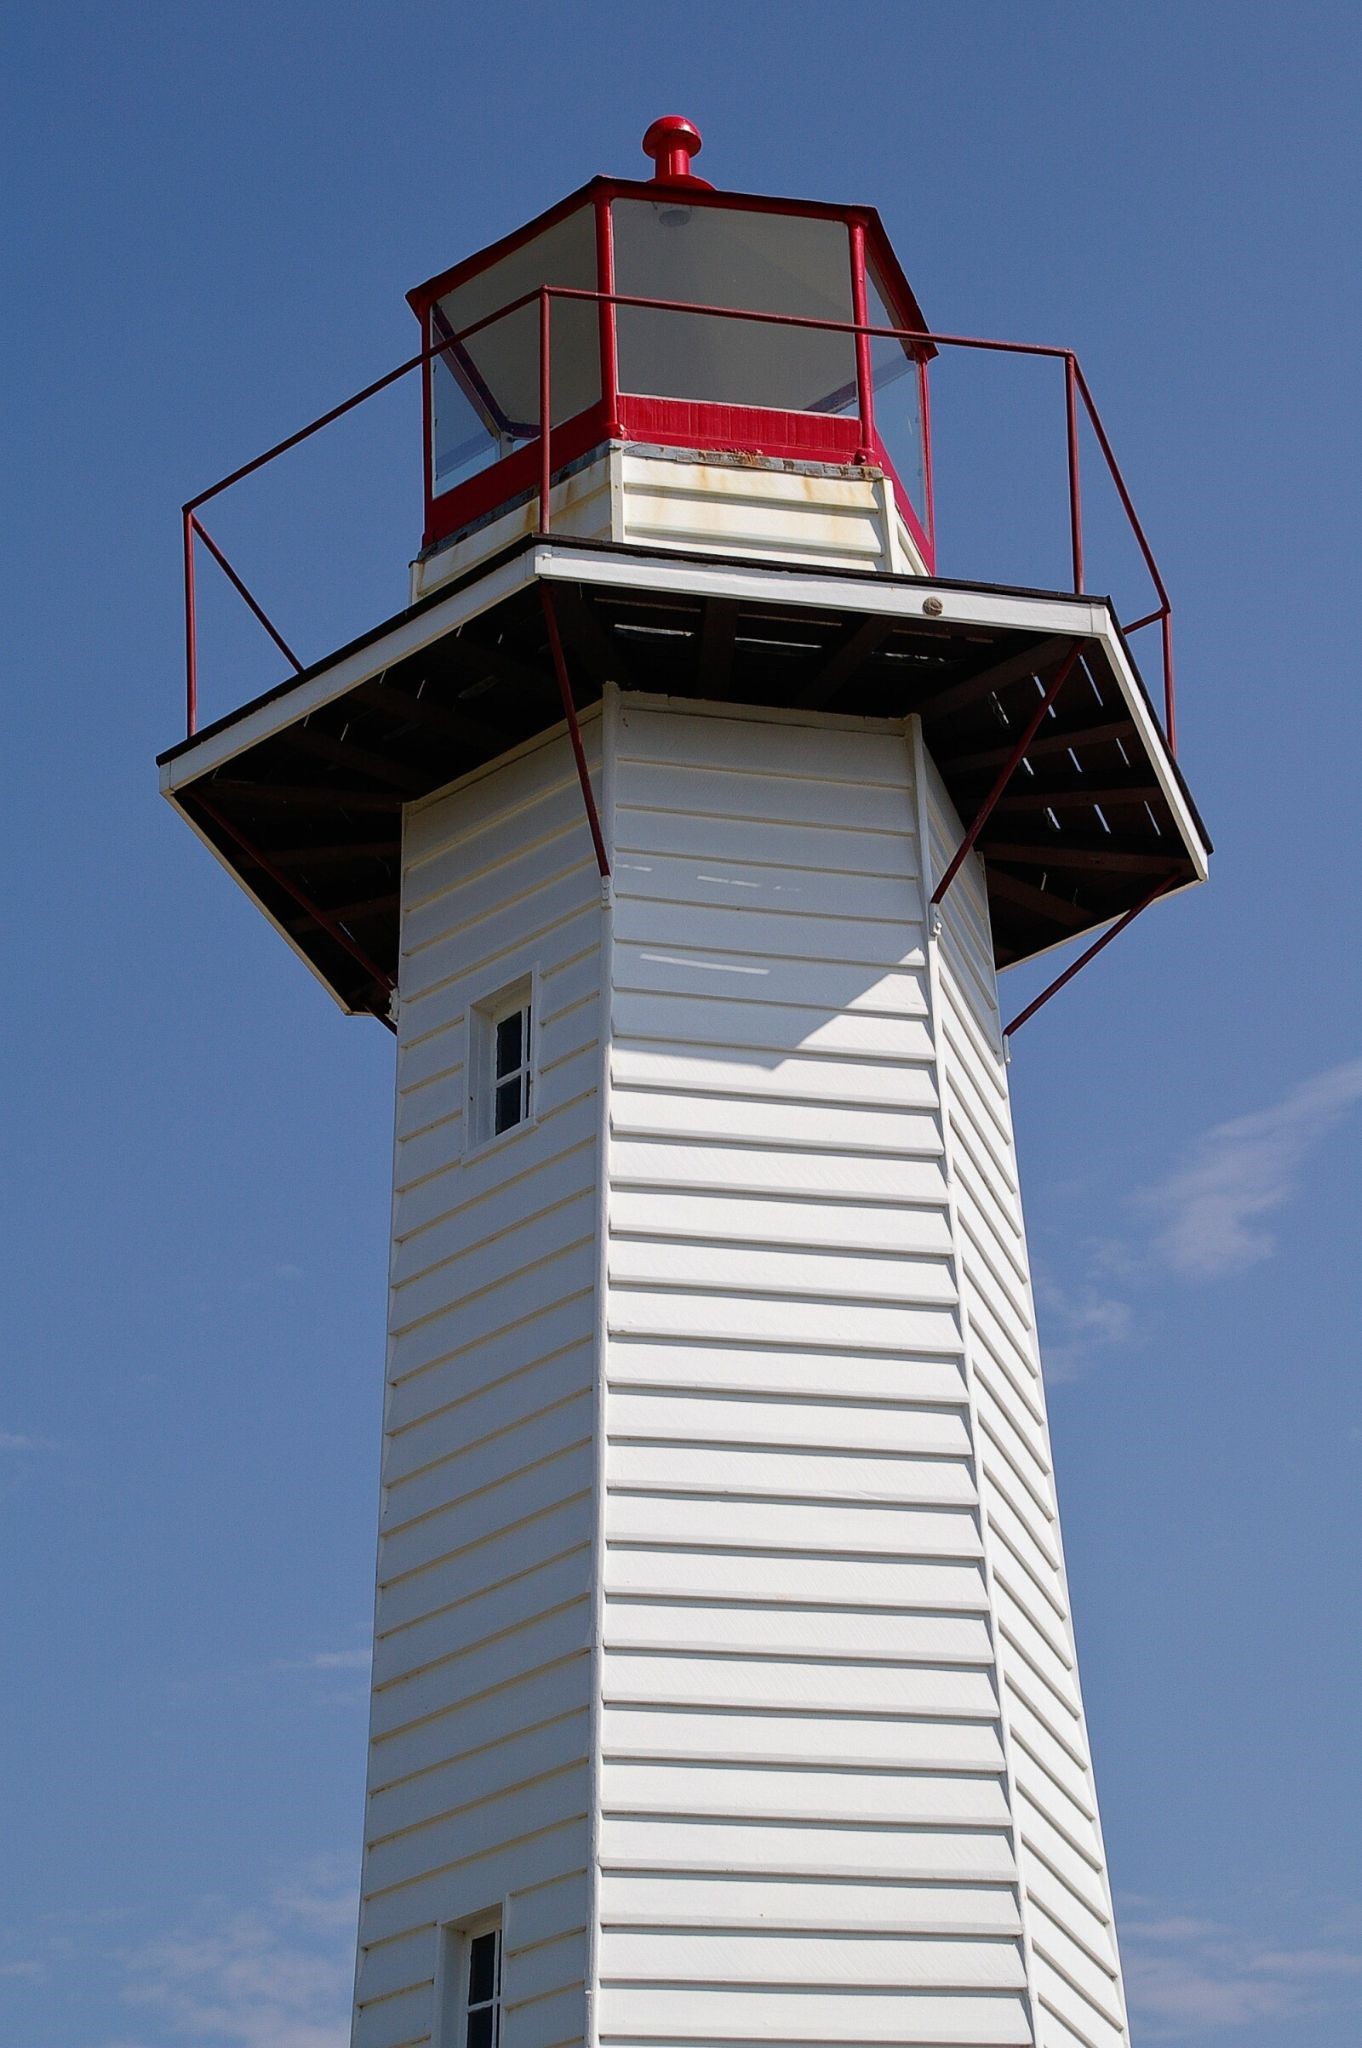 observation tower for security guard